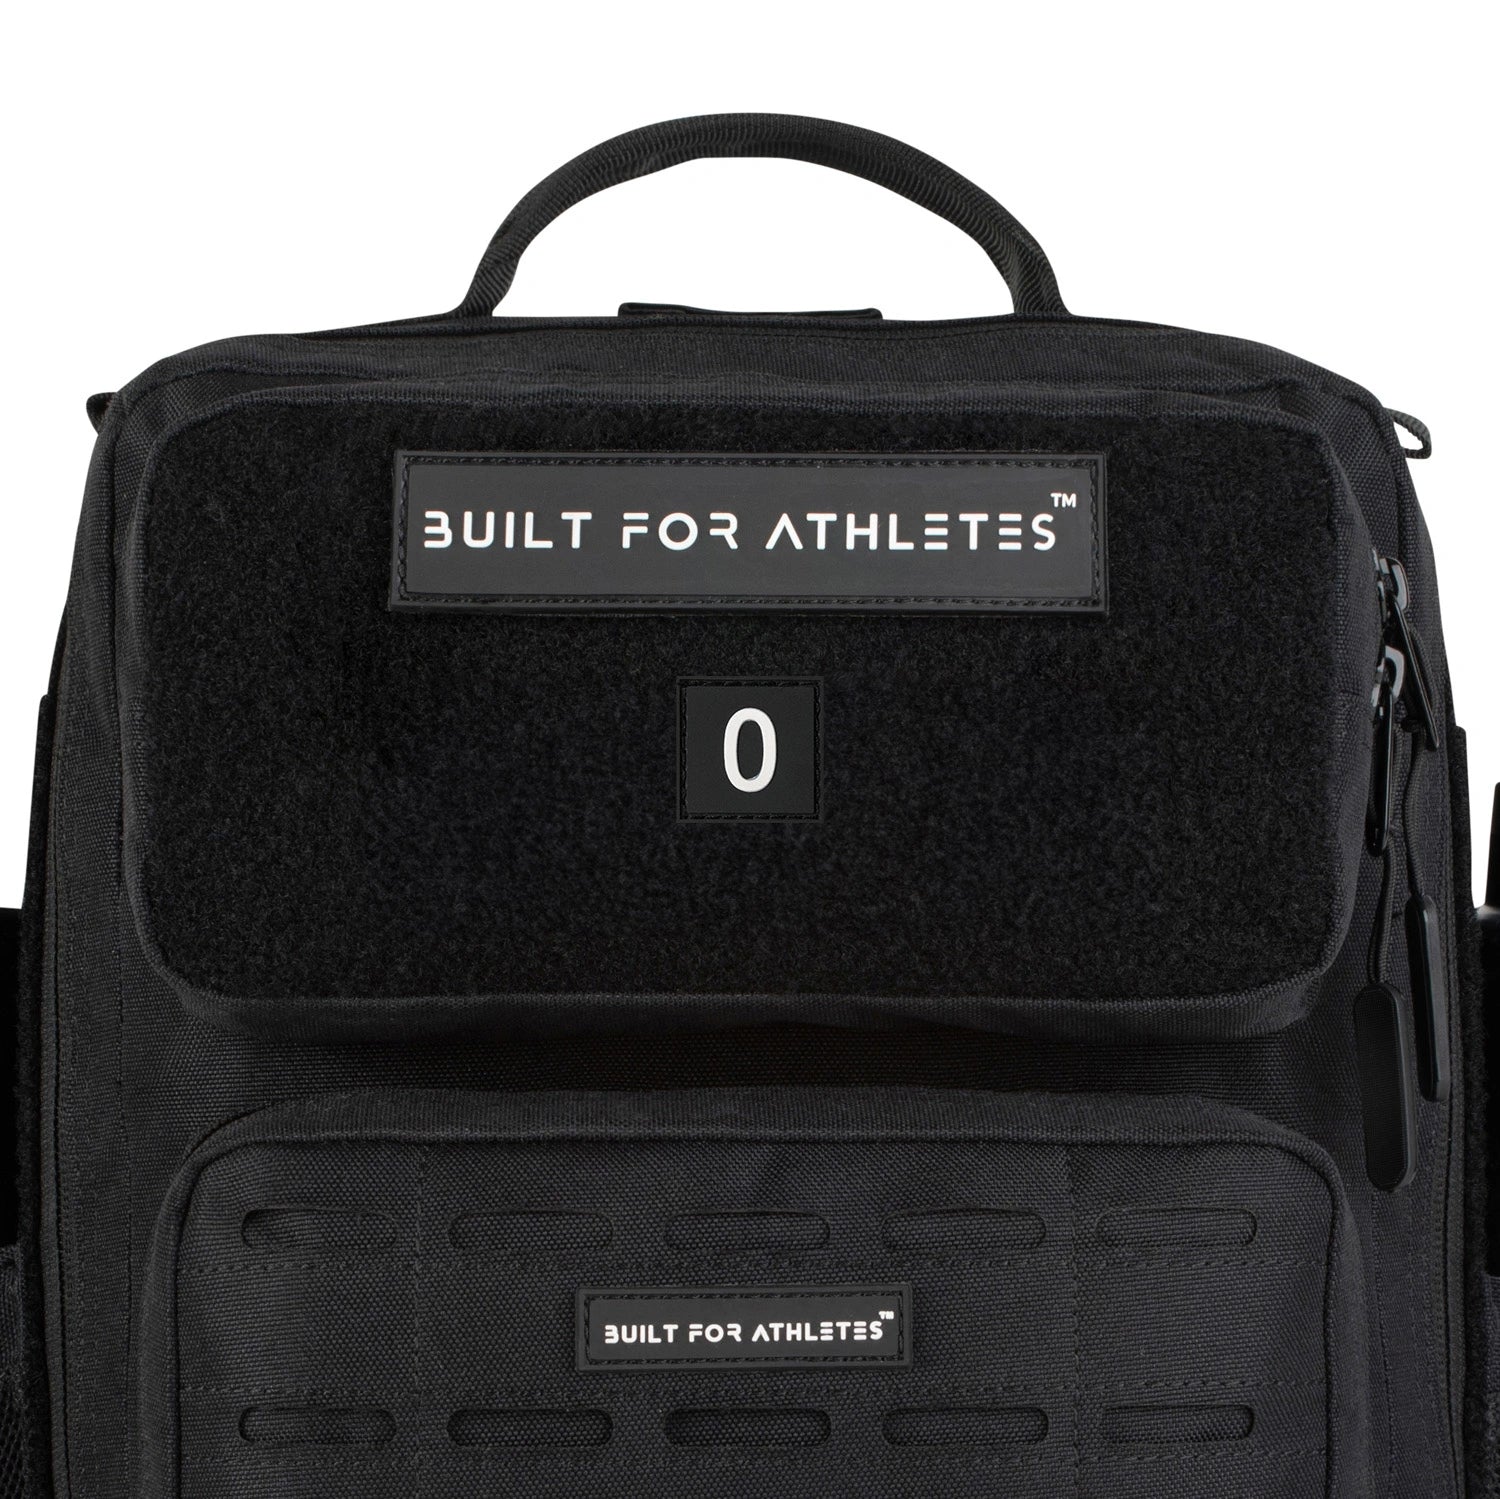 Built for Athletes Patches 0 0-9 Number Rubber Patches